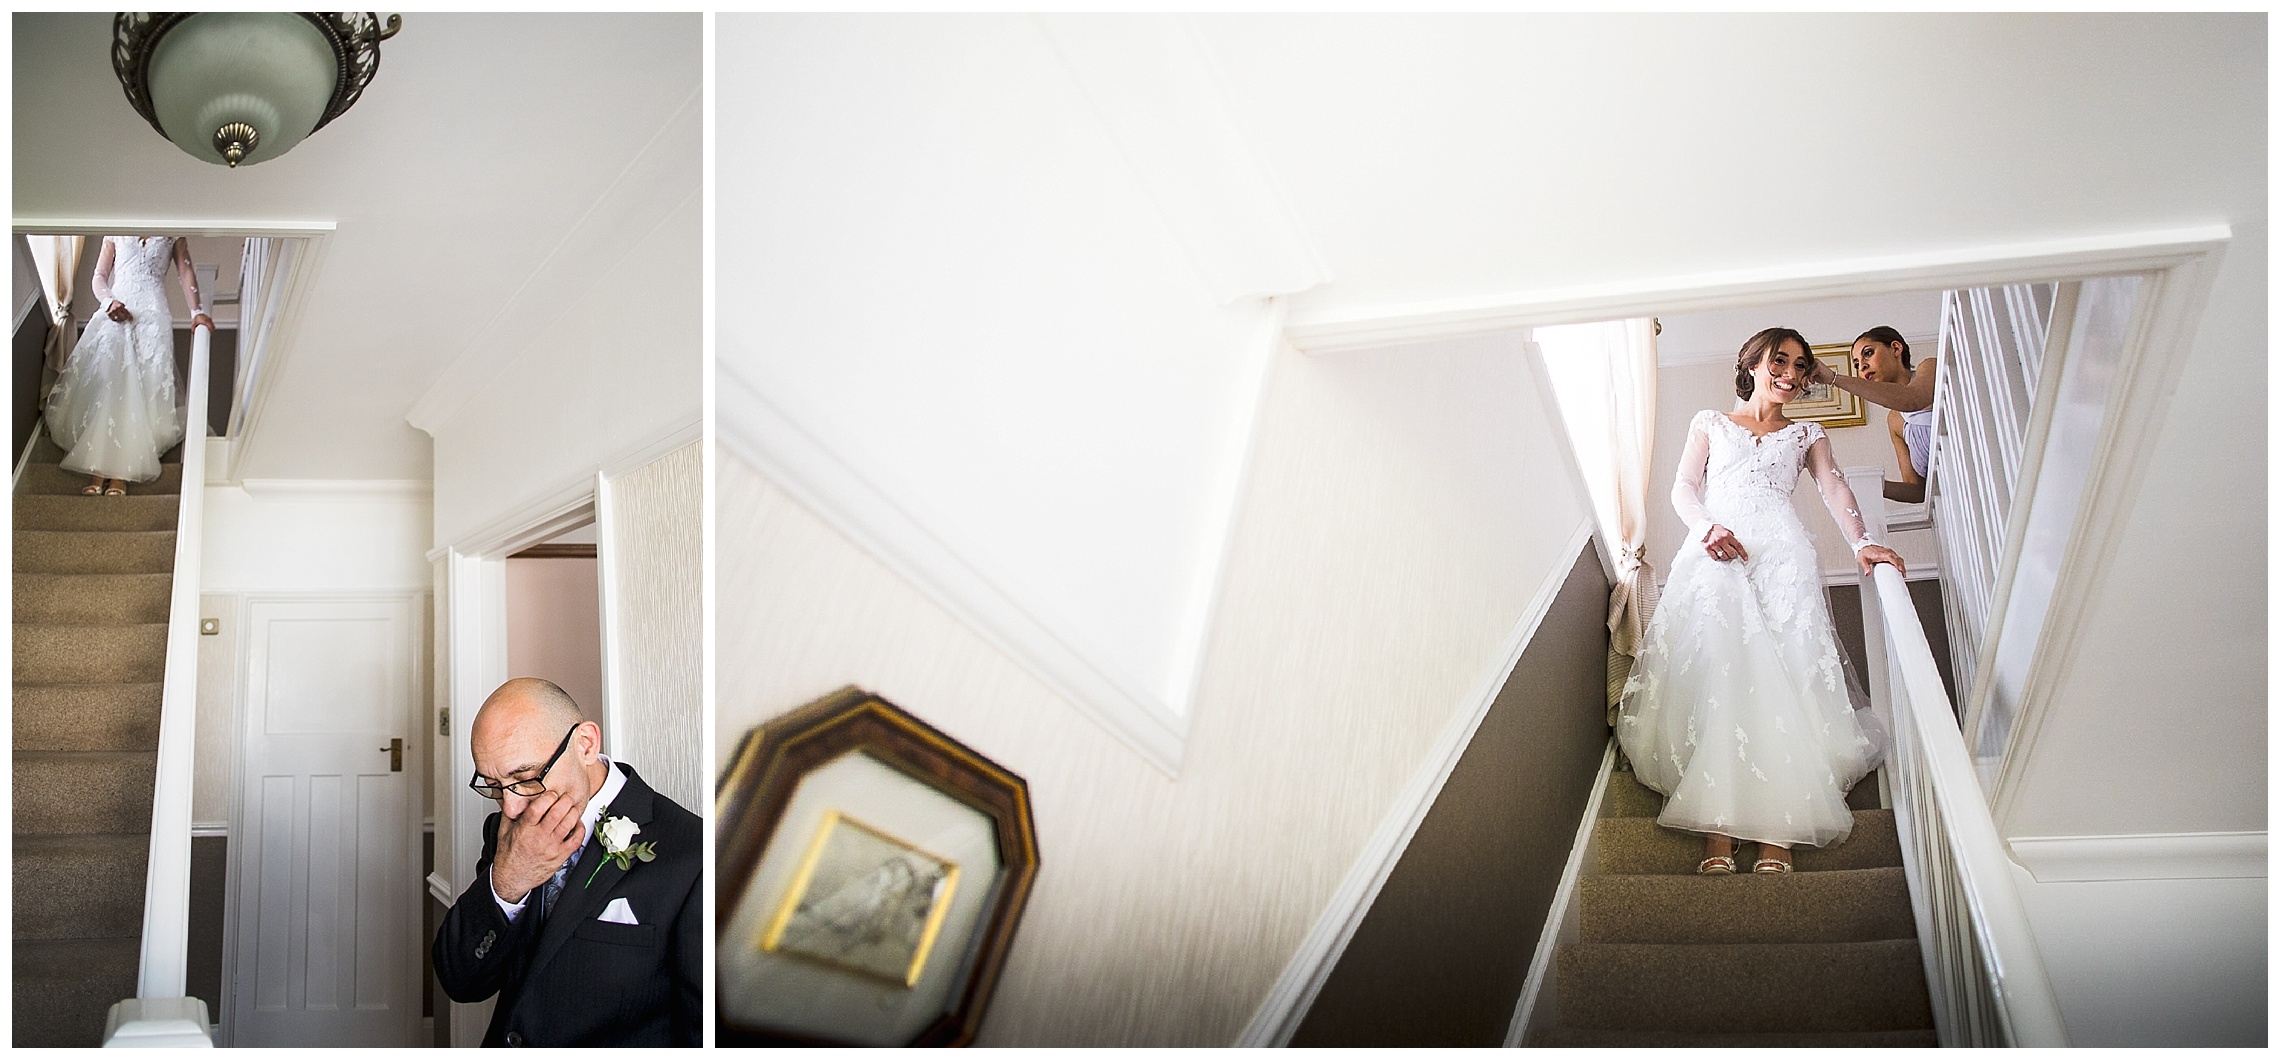 nervous father of the bride watches bride descend stairs in wedding dress